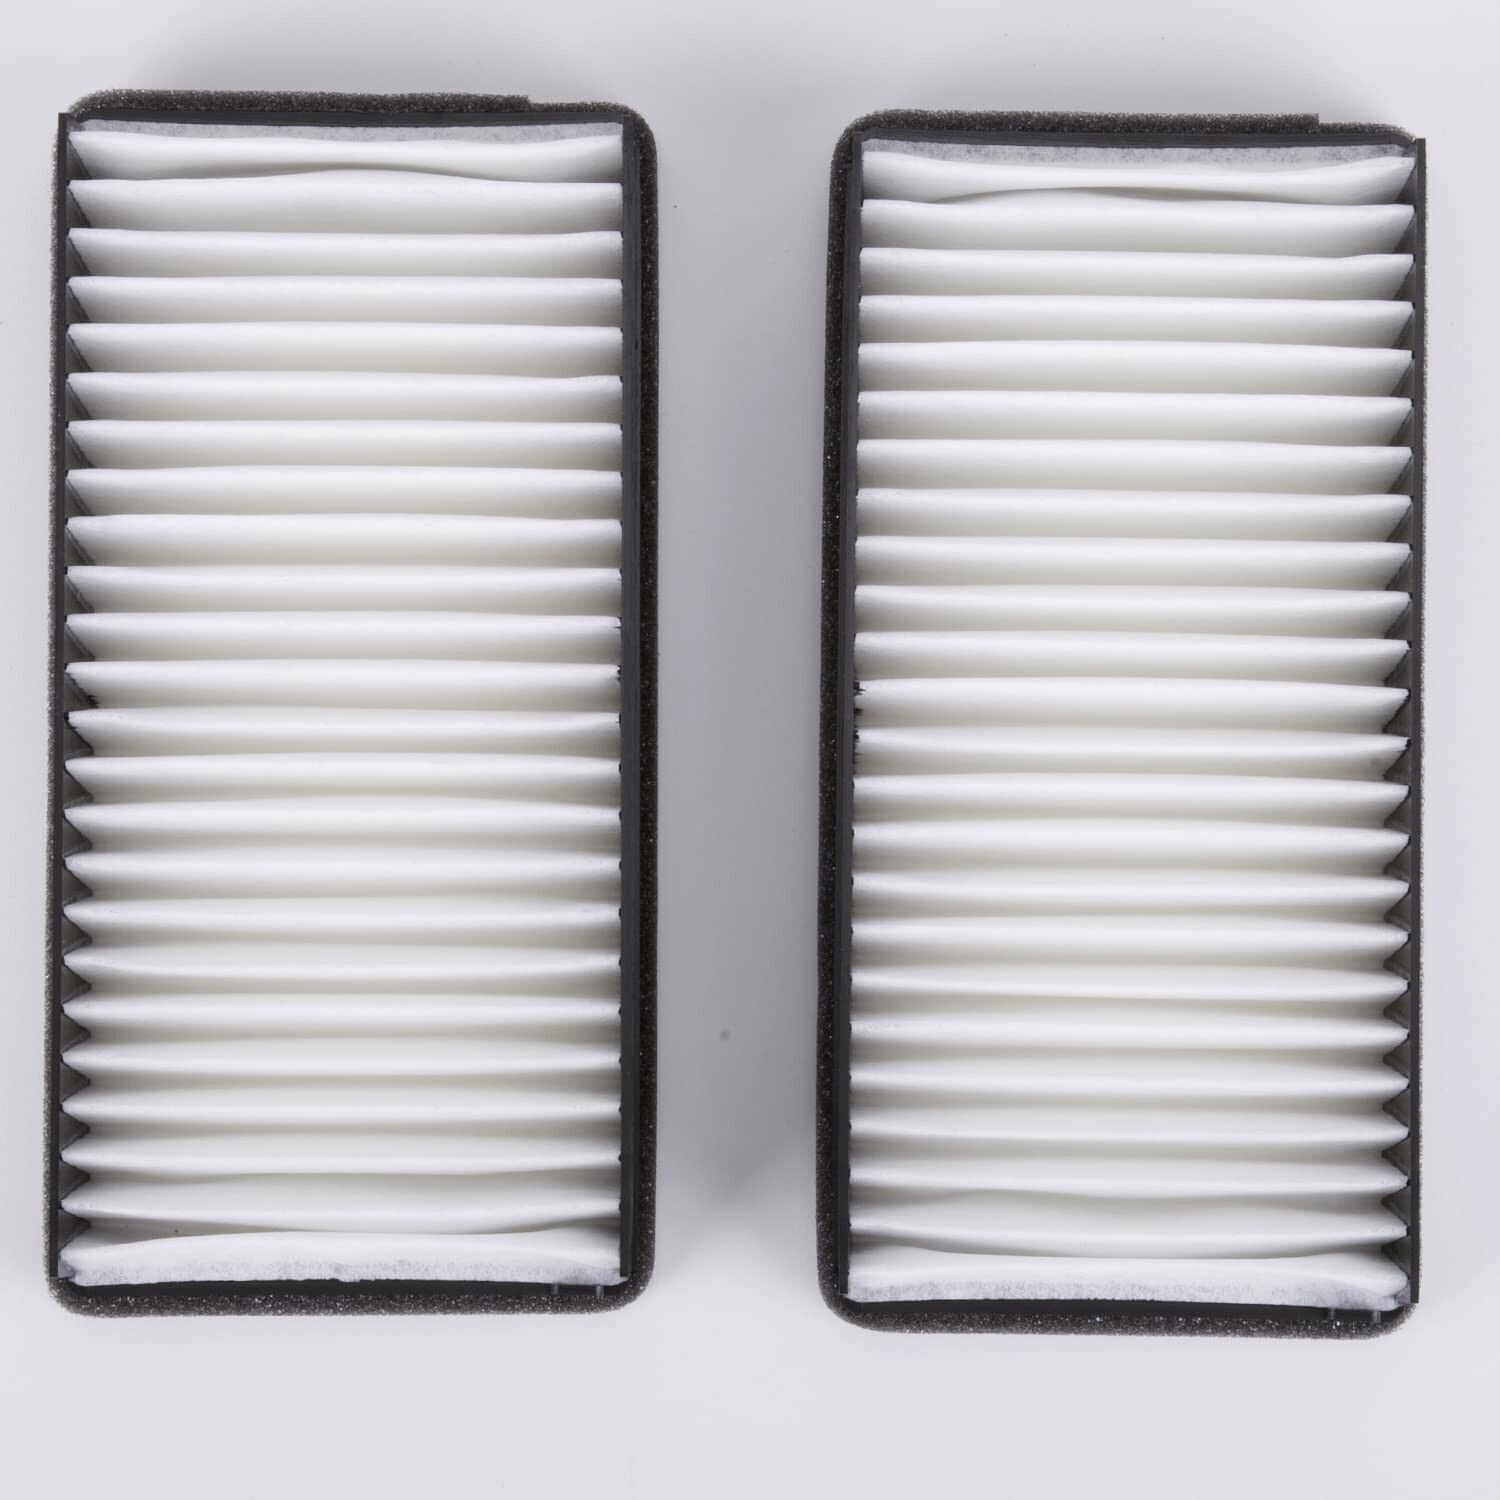 For 02-07 Buick Rainier Rendezvous Terraza 01-08 Chevy Uplander Cabin Air Filter